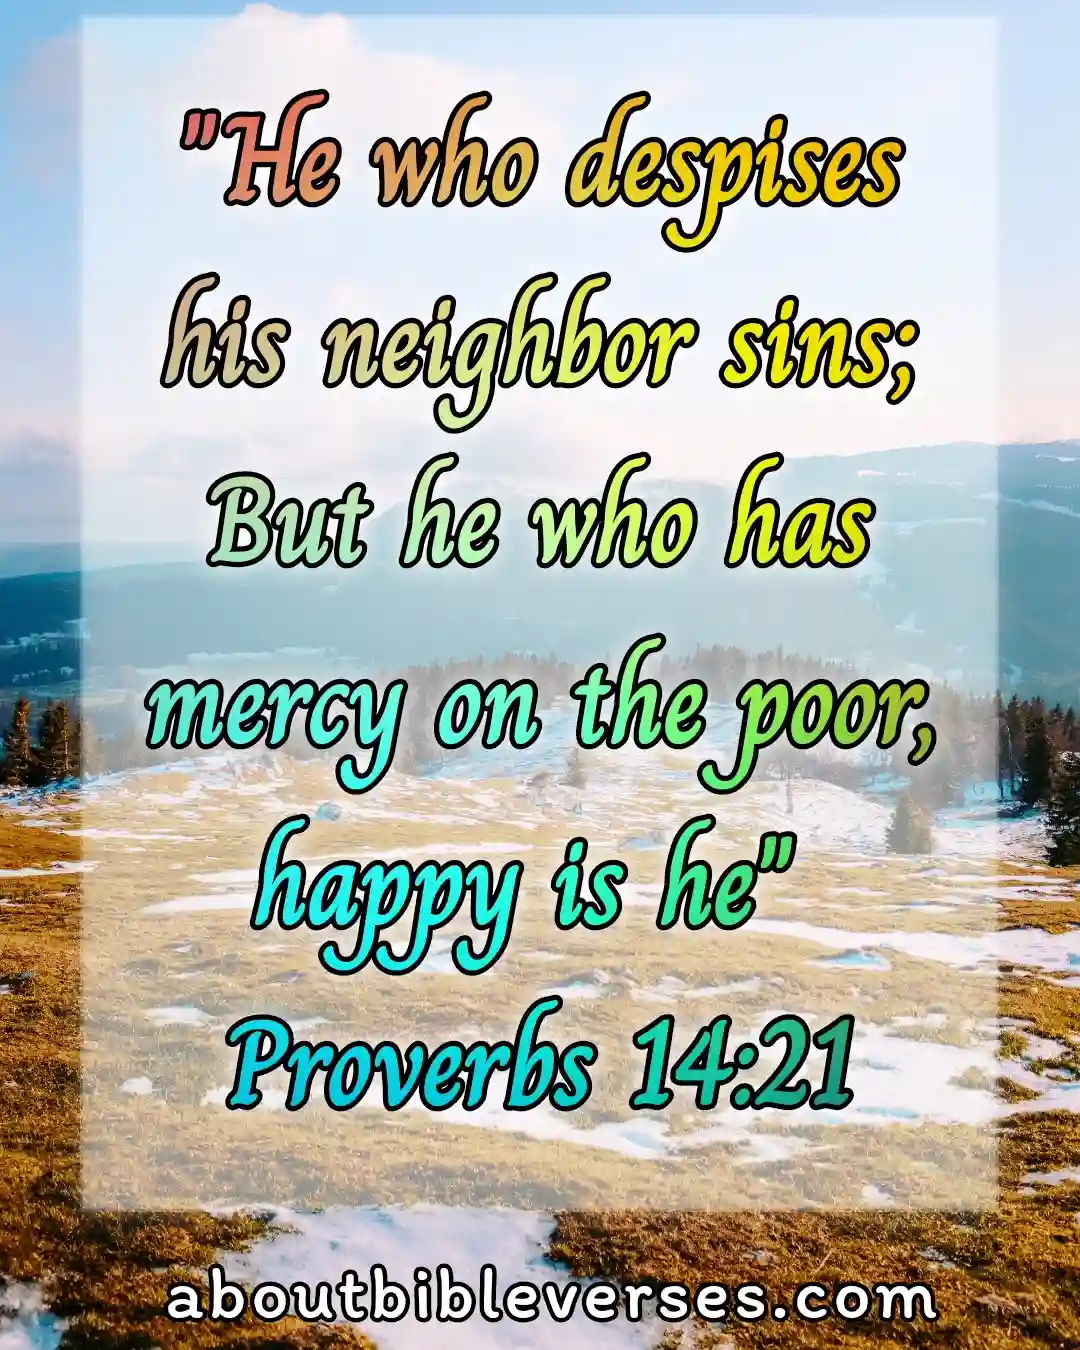 Bible Verses About Serving Others (Proverbs 14:21)